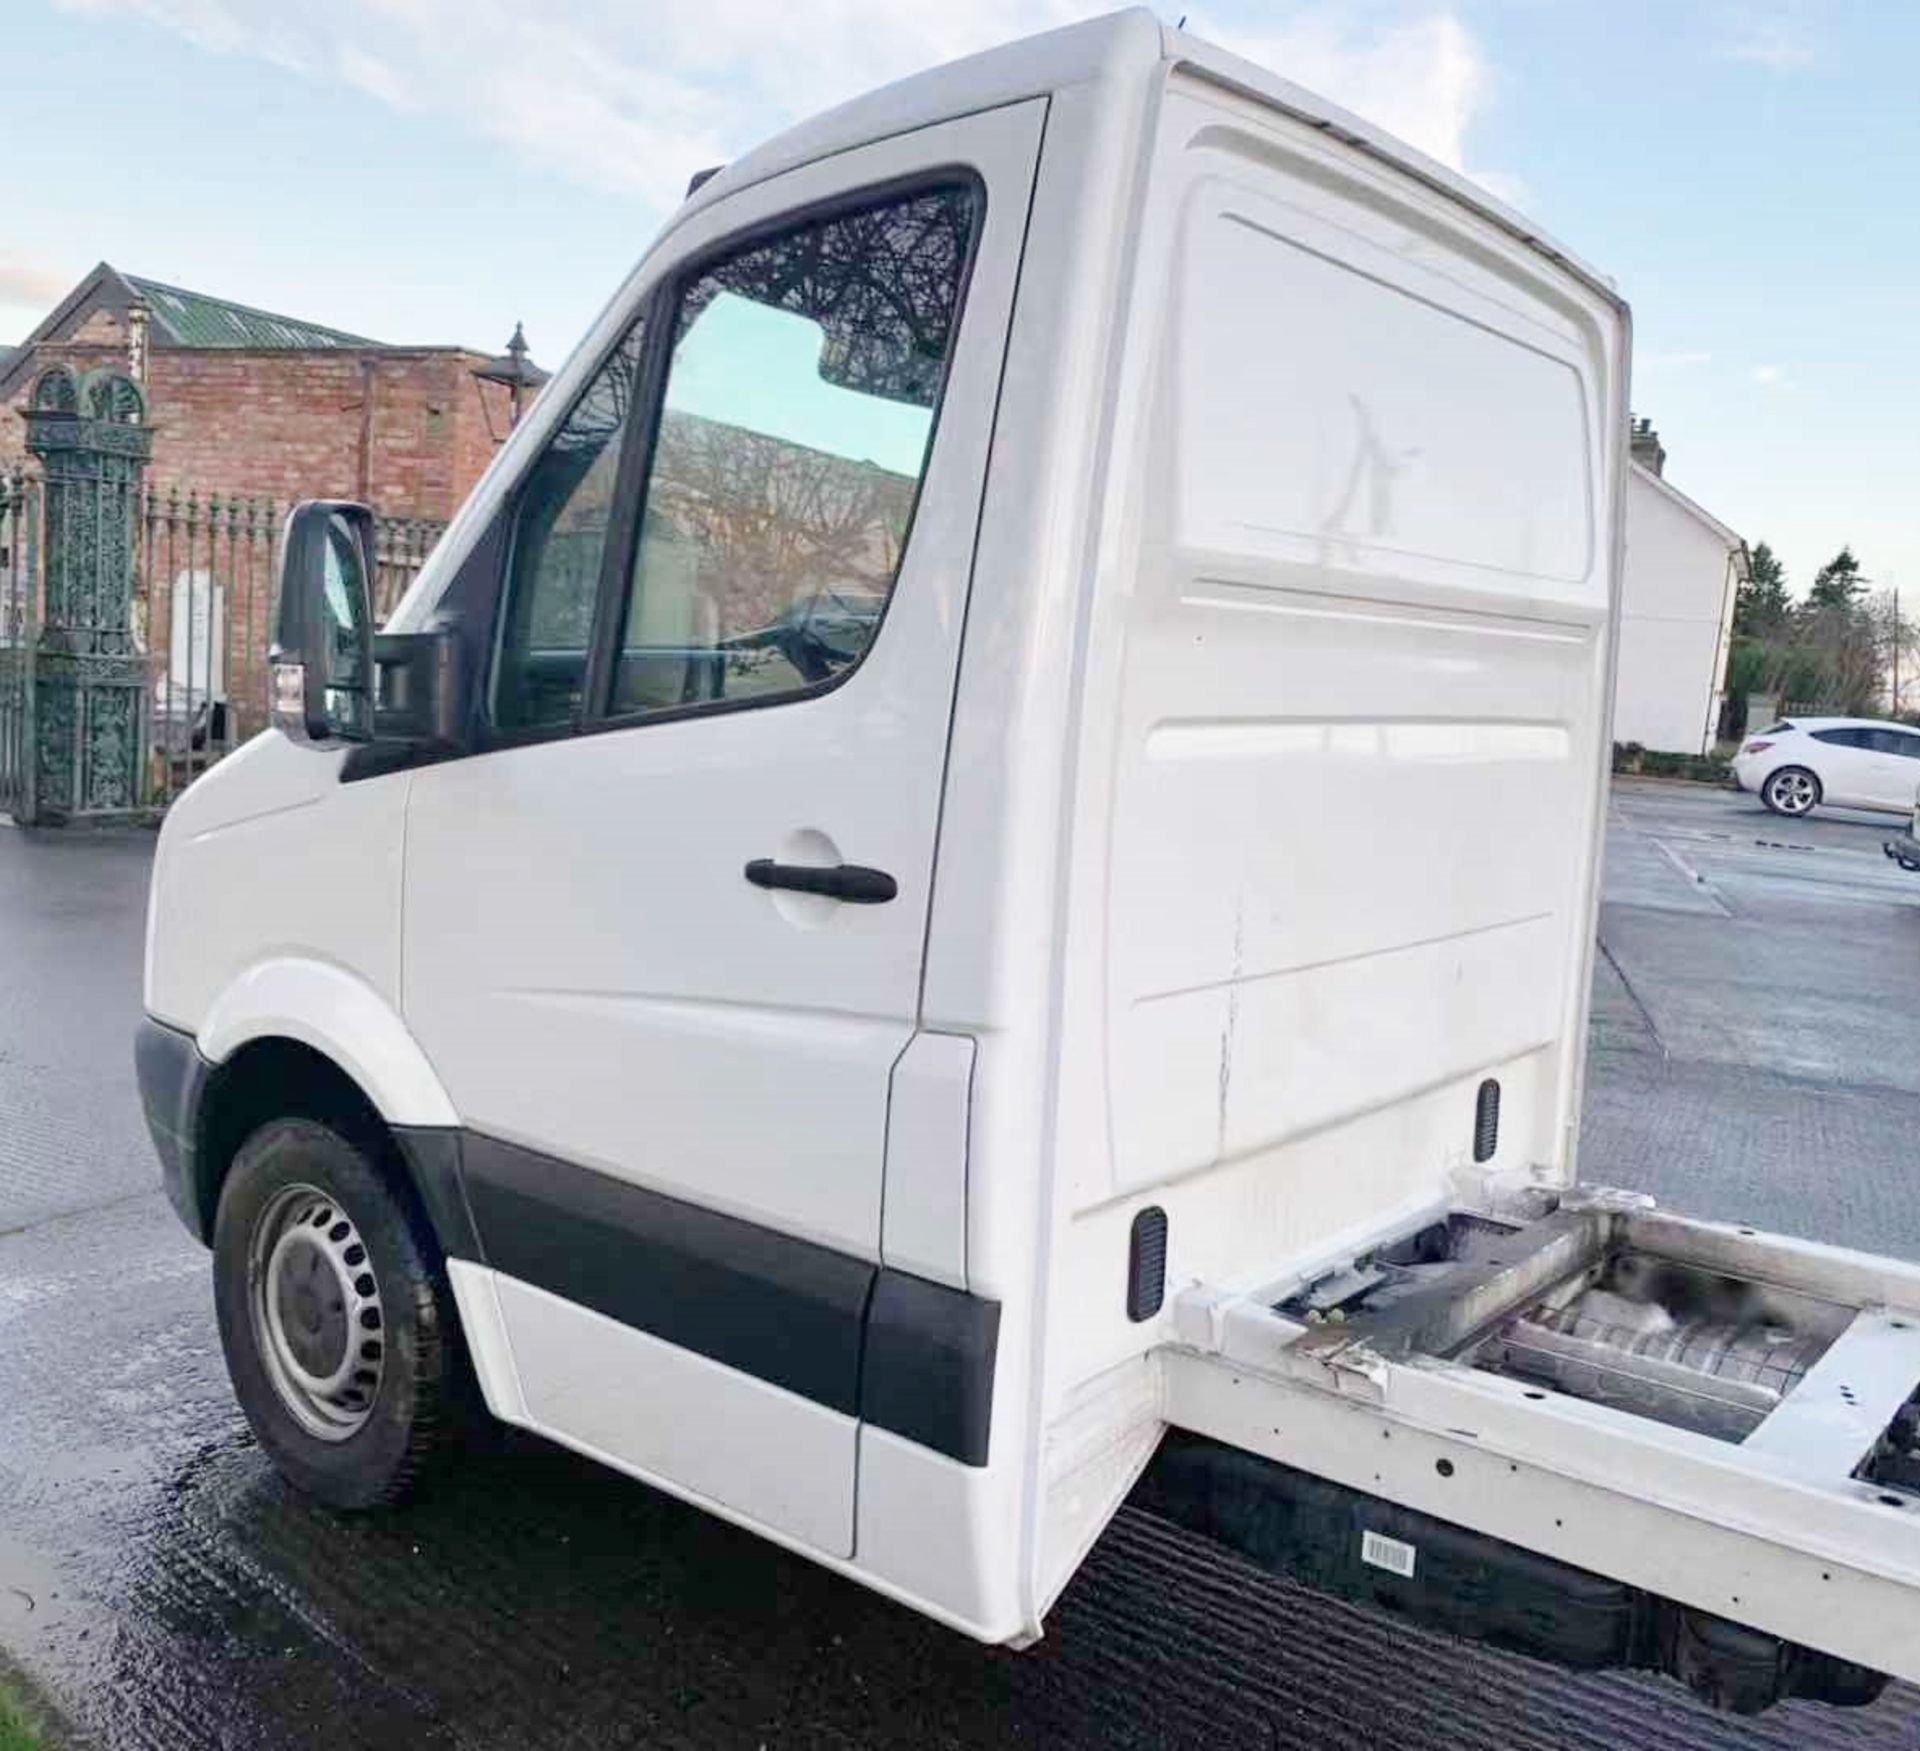 2015 (163 bhp) crafter chassis cab - Image 8 of 8